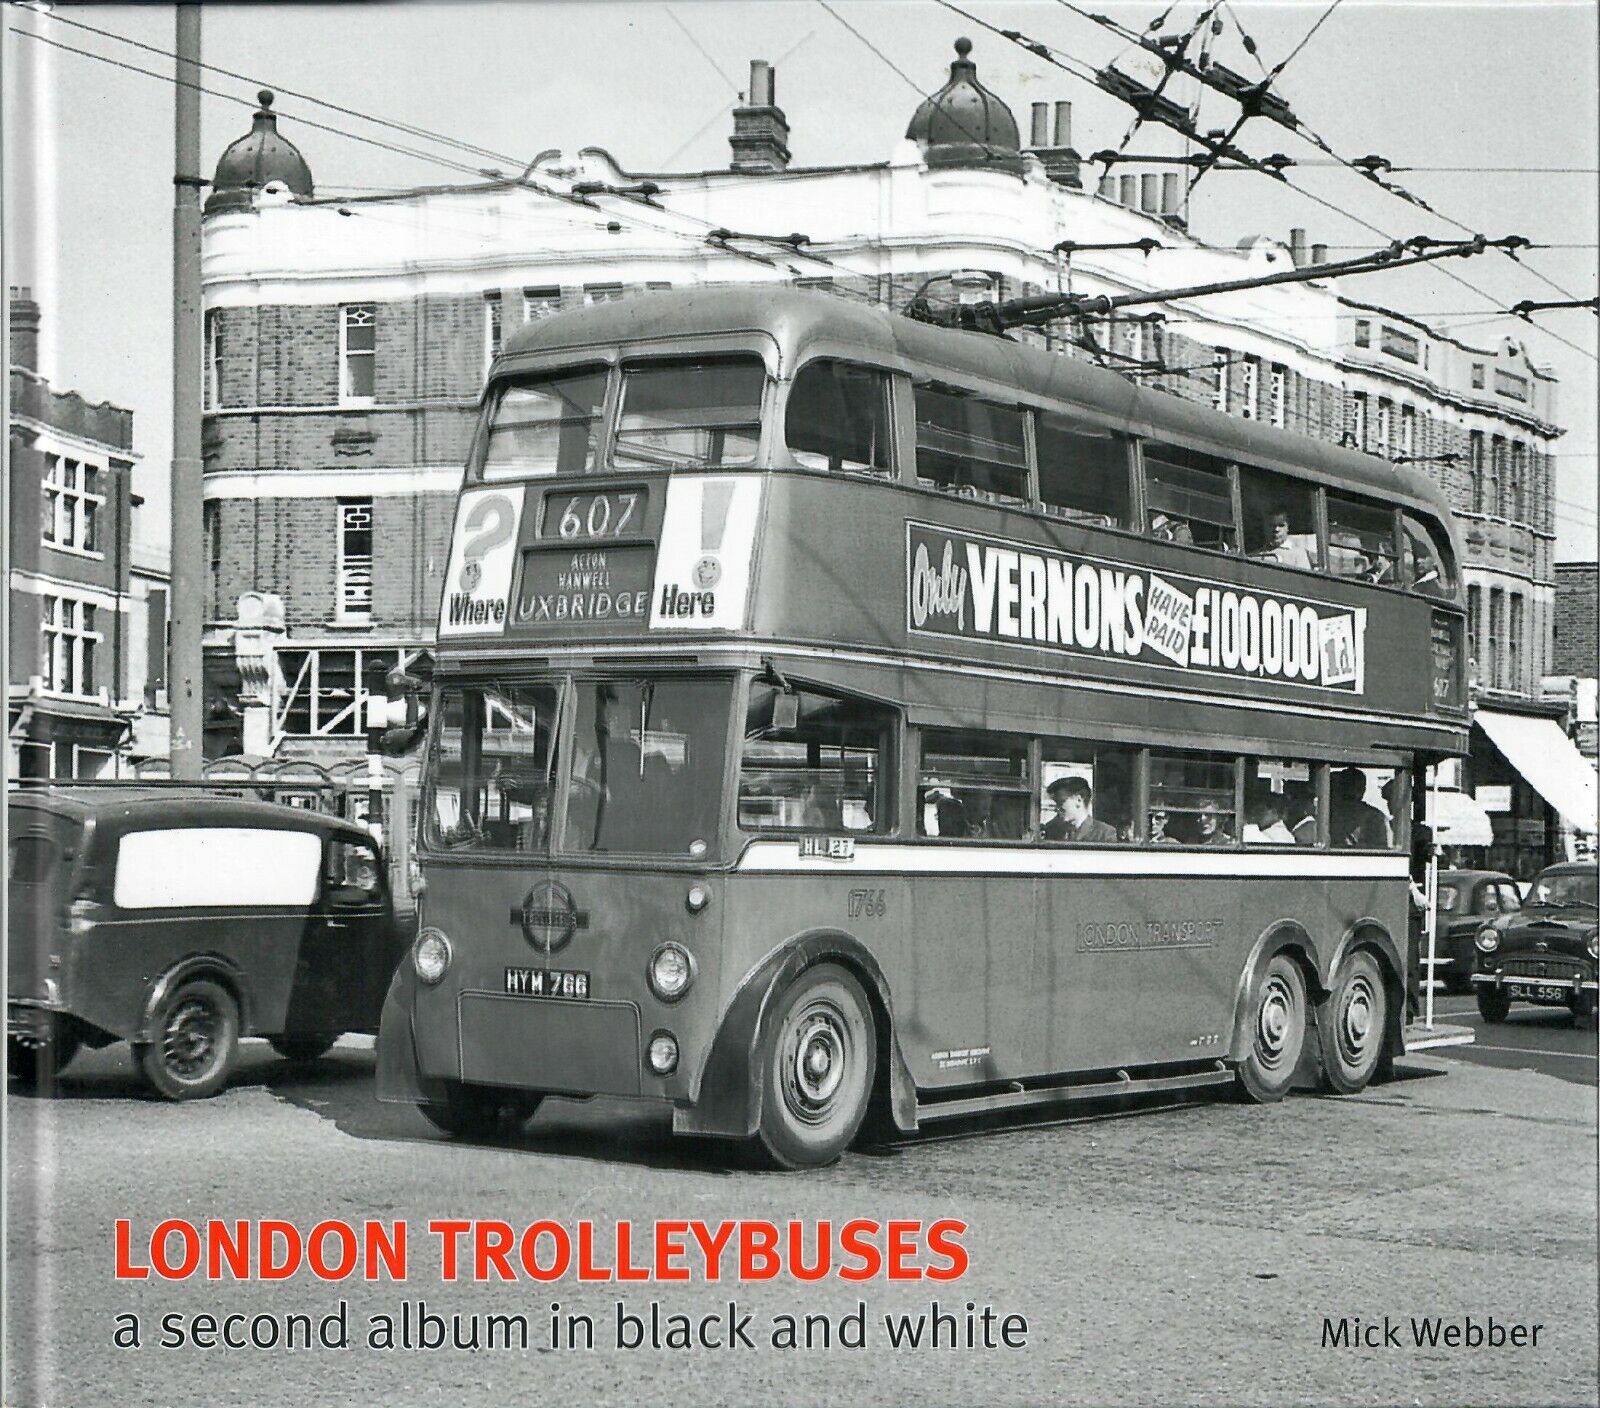 London Trolleybuses - a second album in black & white